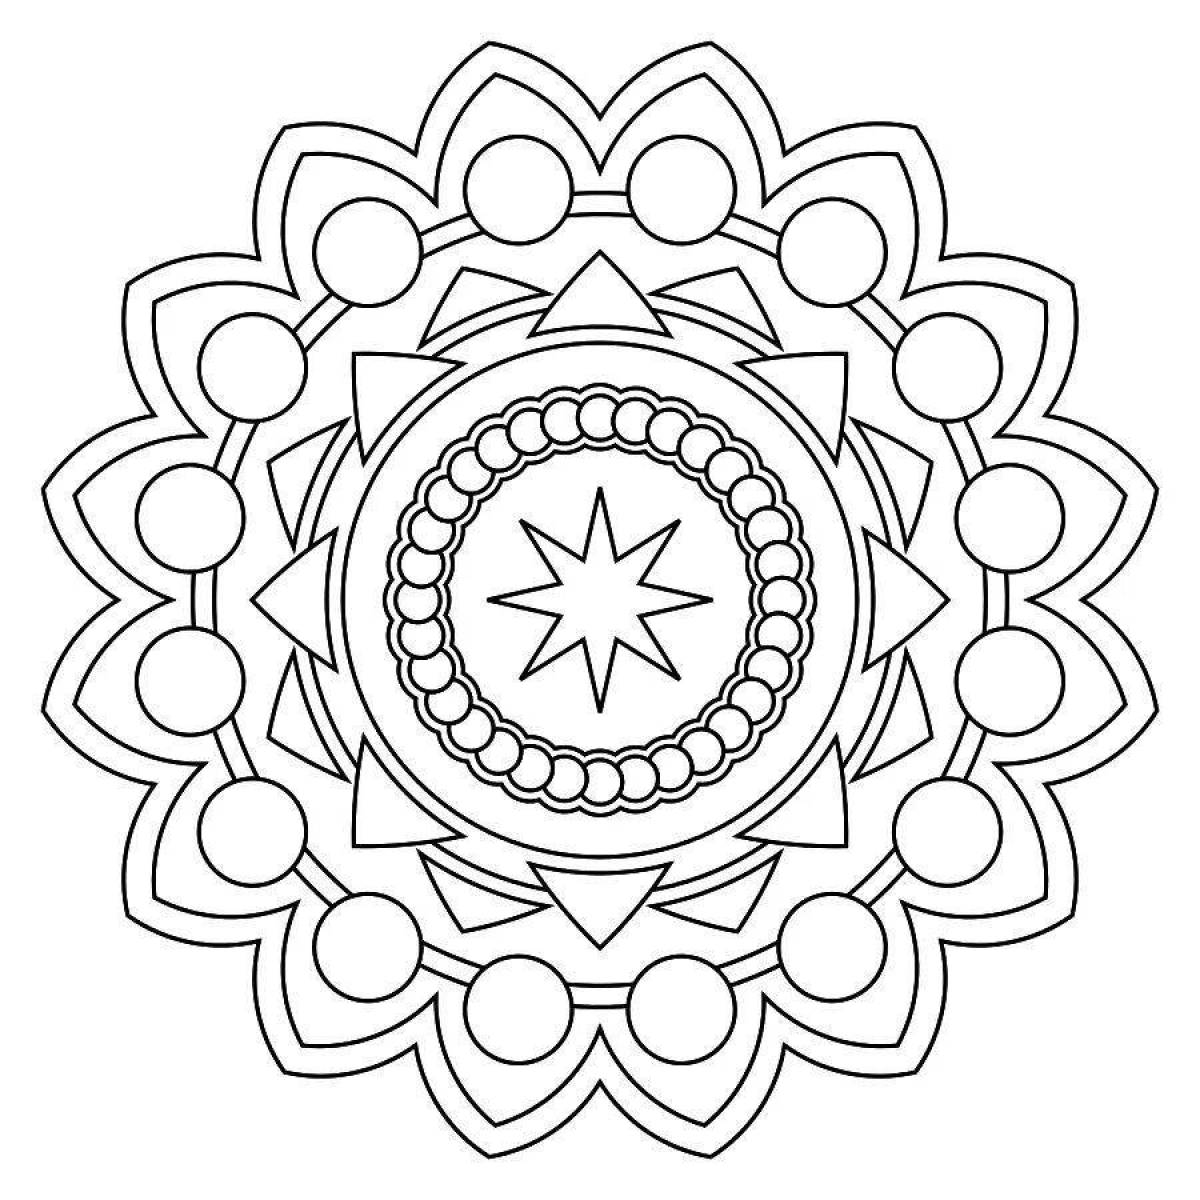 Joyful Mantra Coloring Pages for Toddlers